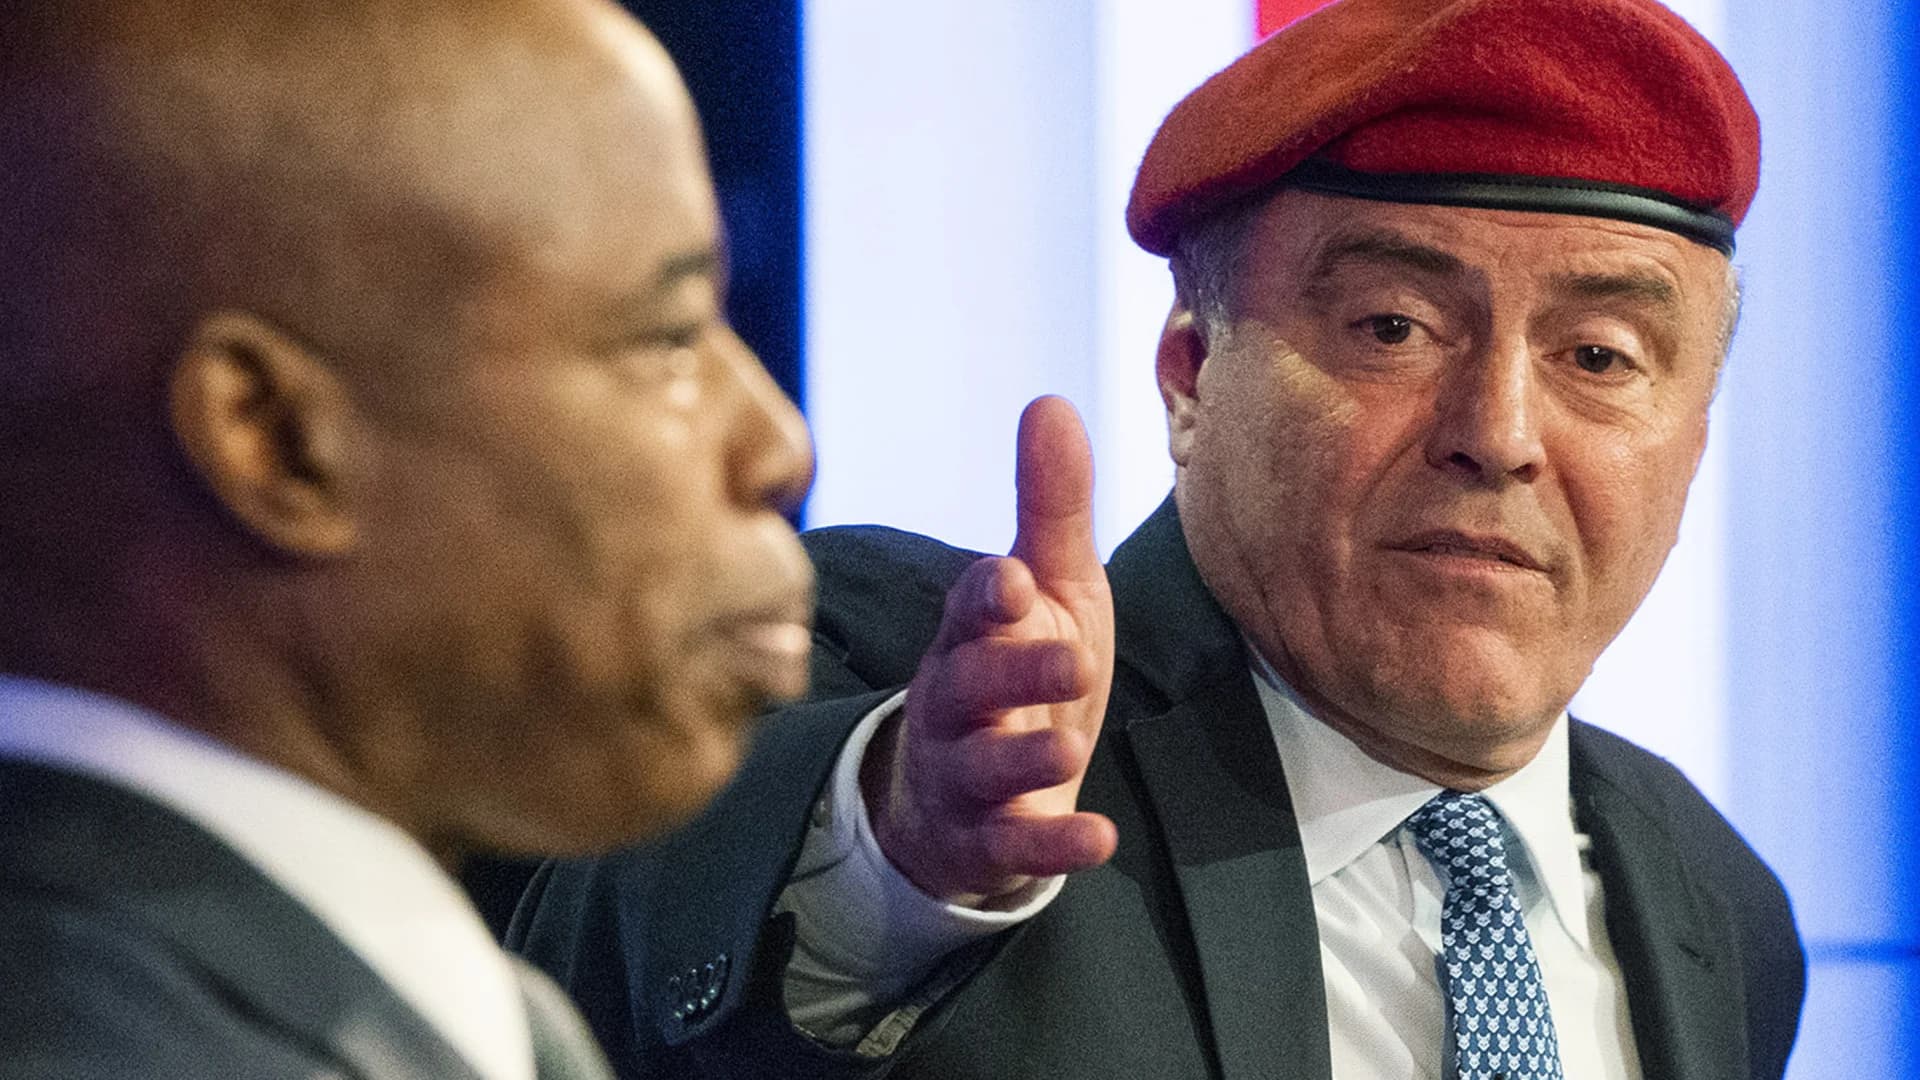 Campaign says NYC mayoral candidate Curtis Sliwa hit by taxi